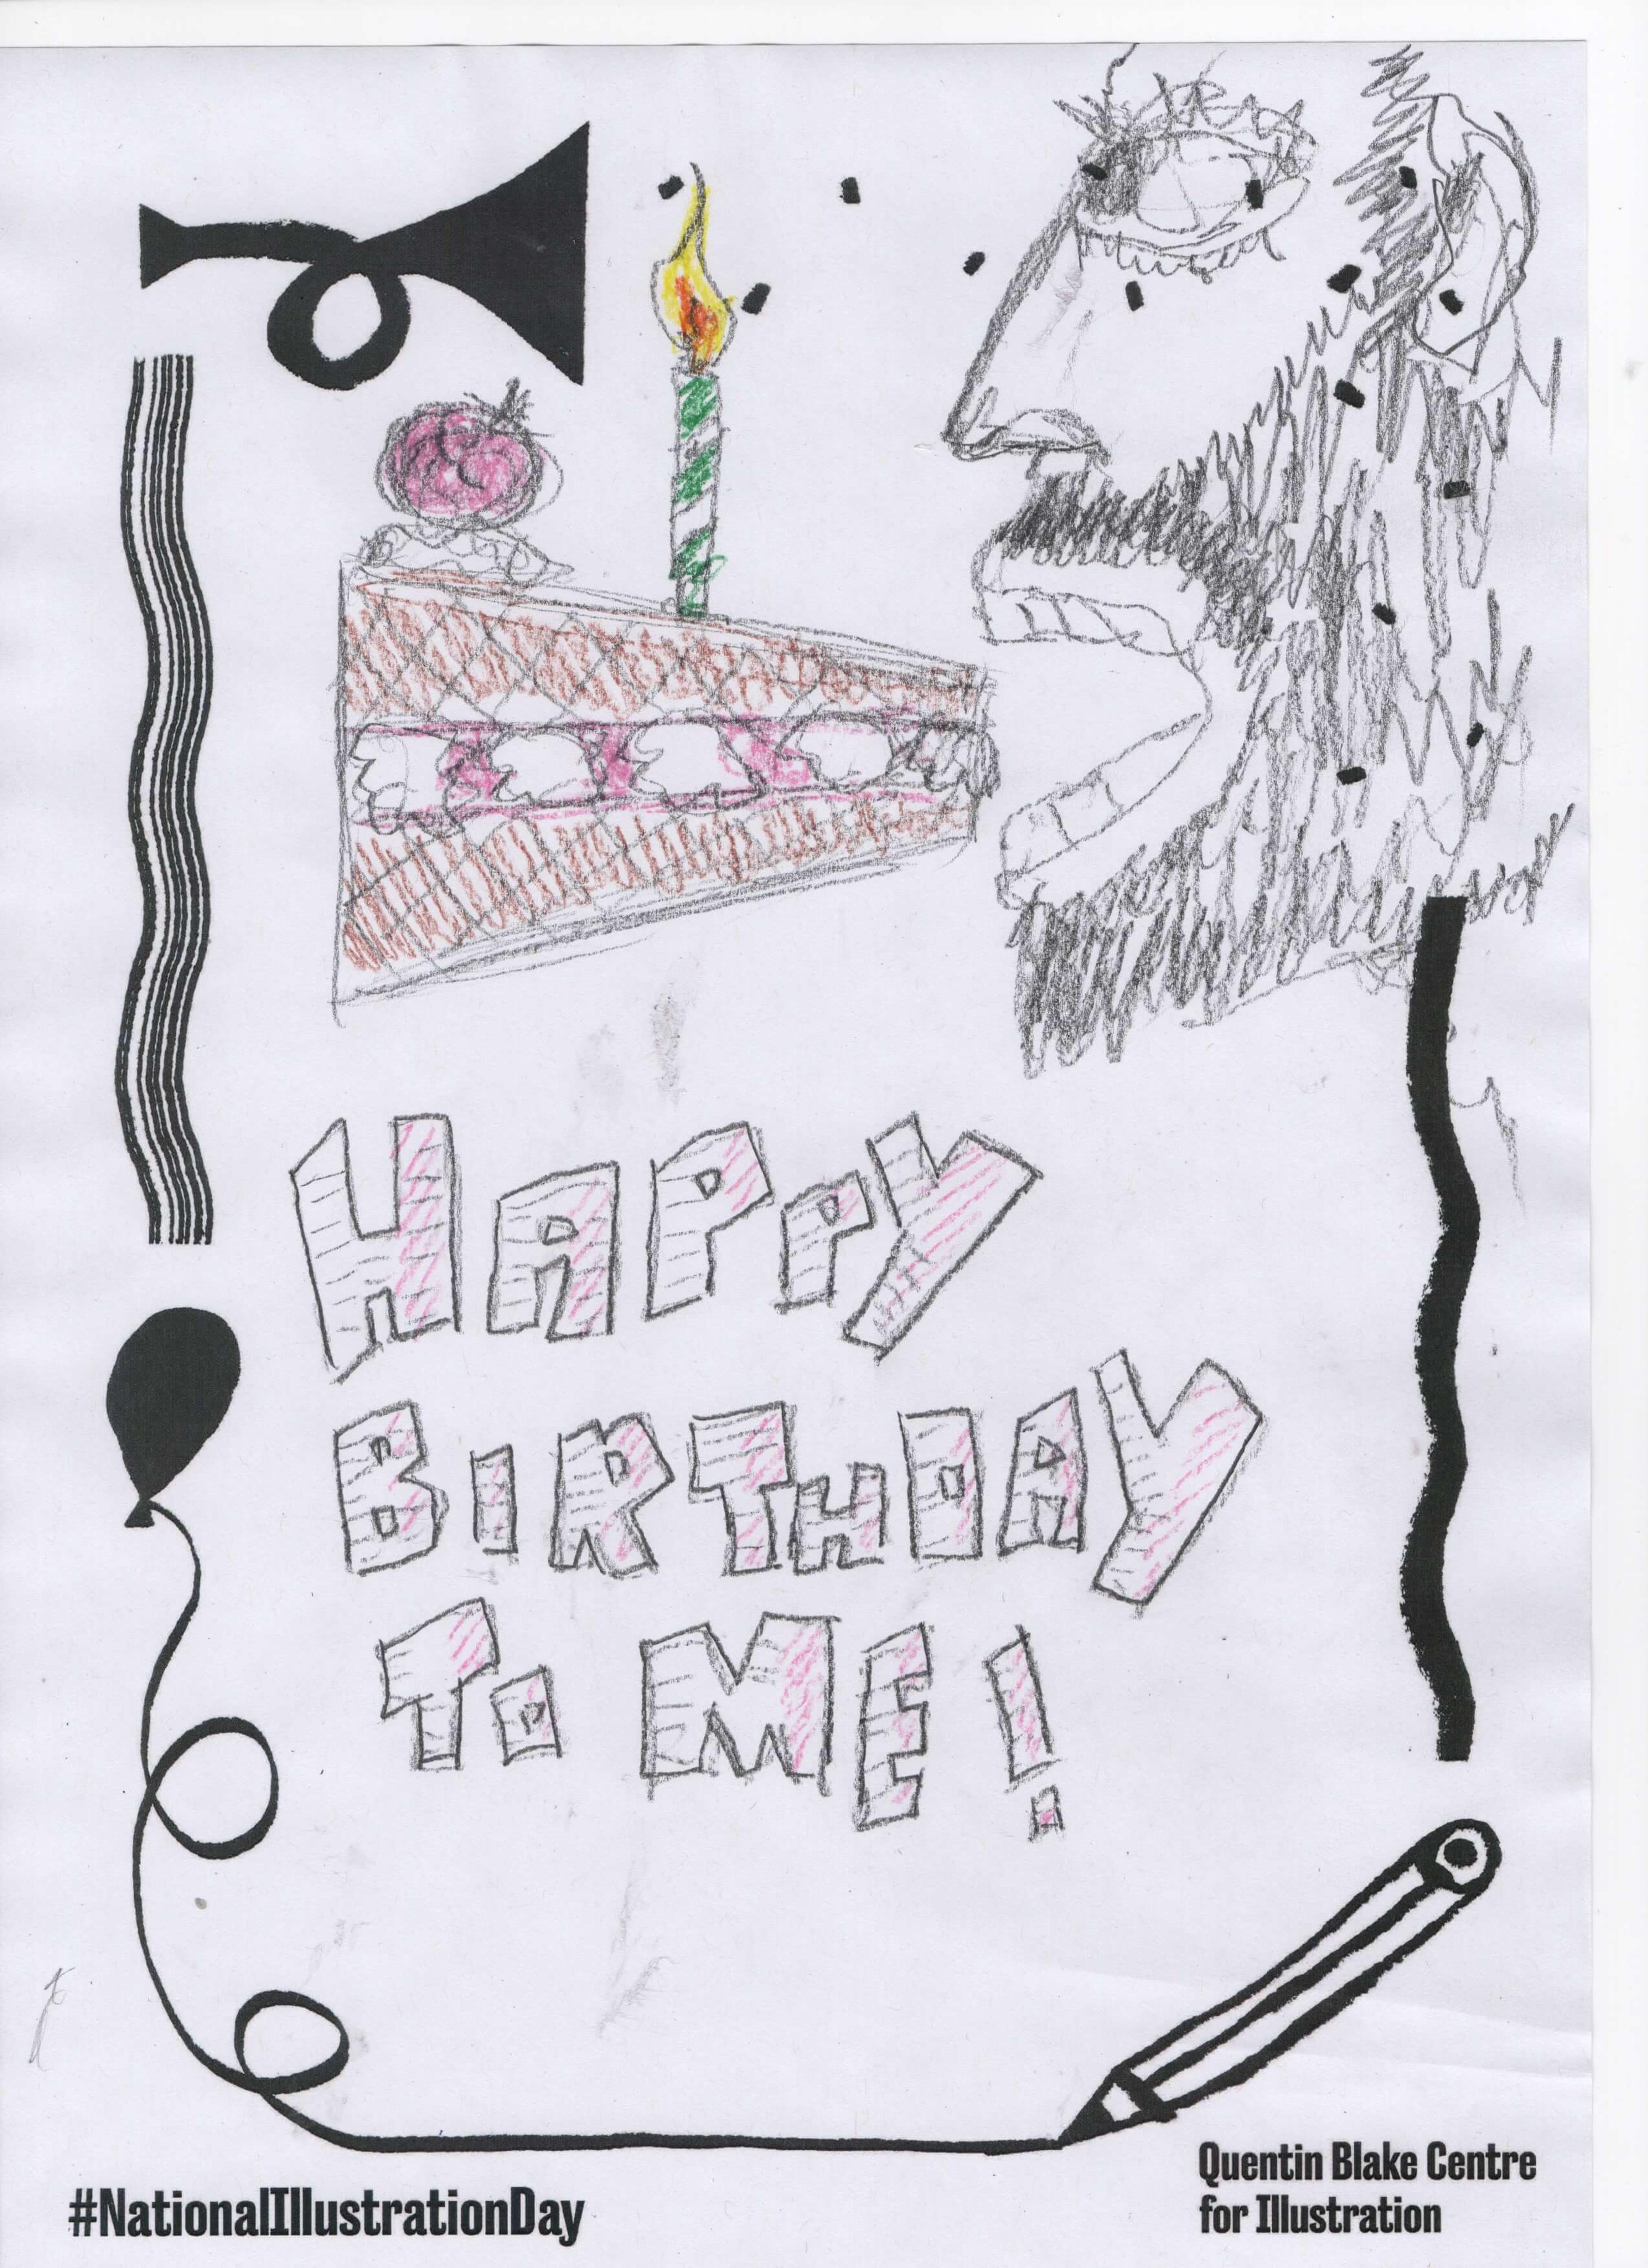 A pencil sketch of a bearded face in profile view, with their mouth open.There's a slice of birthday cake flying into their mouth. The picture includes the words "happy birthday to me" drawn in all-caps, blocky text.